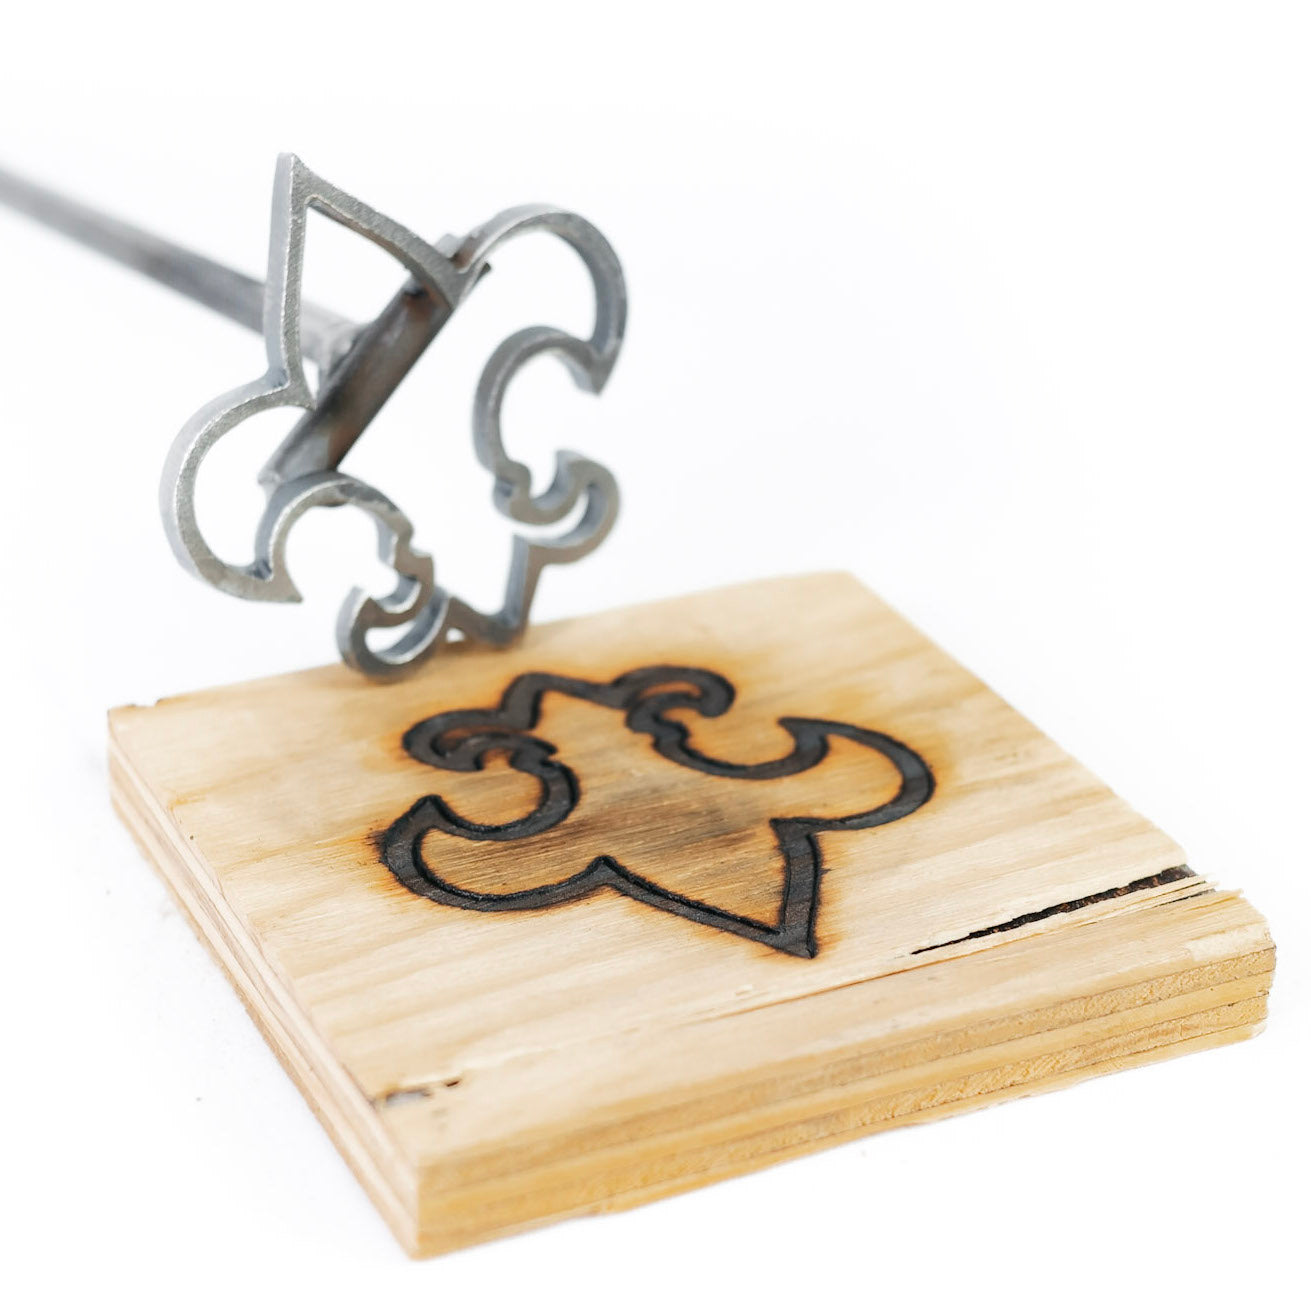 Fleur De Lis - 4" - BBQ, Crafts, Woodworking Projects - The Heritage Forge